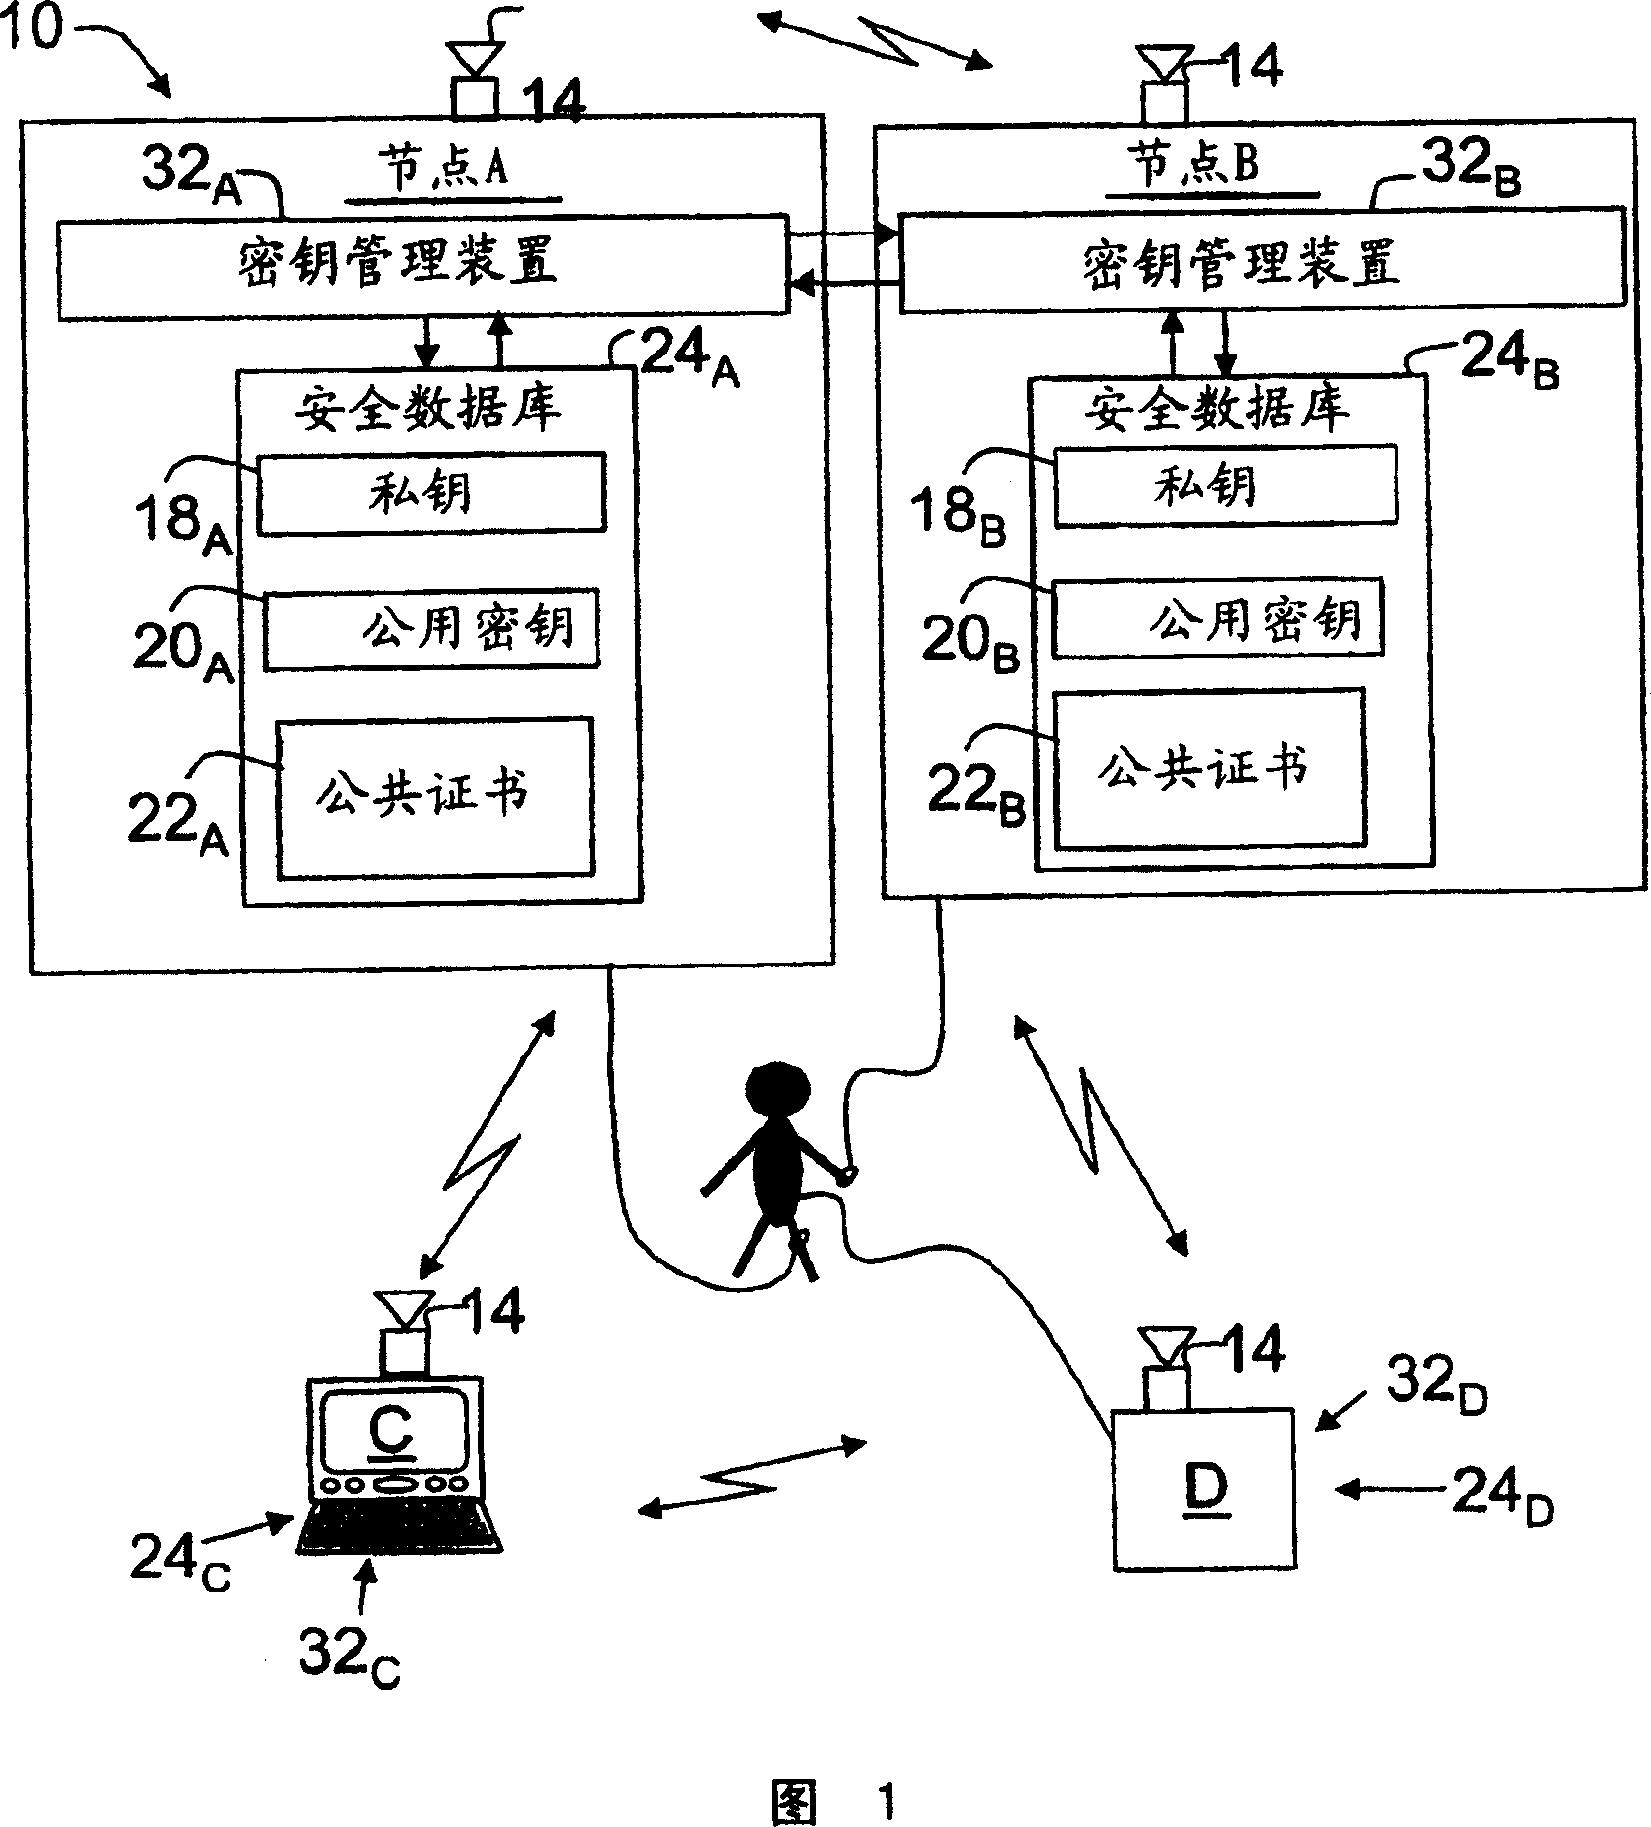 System and methods for efficient authentication of medical wireless self-organizing network nodes